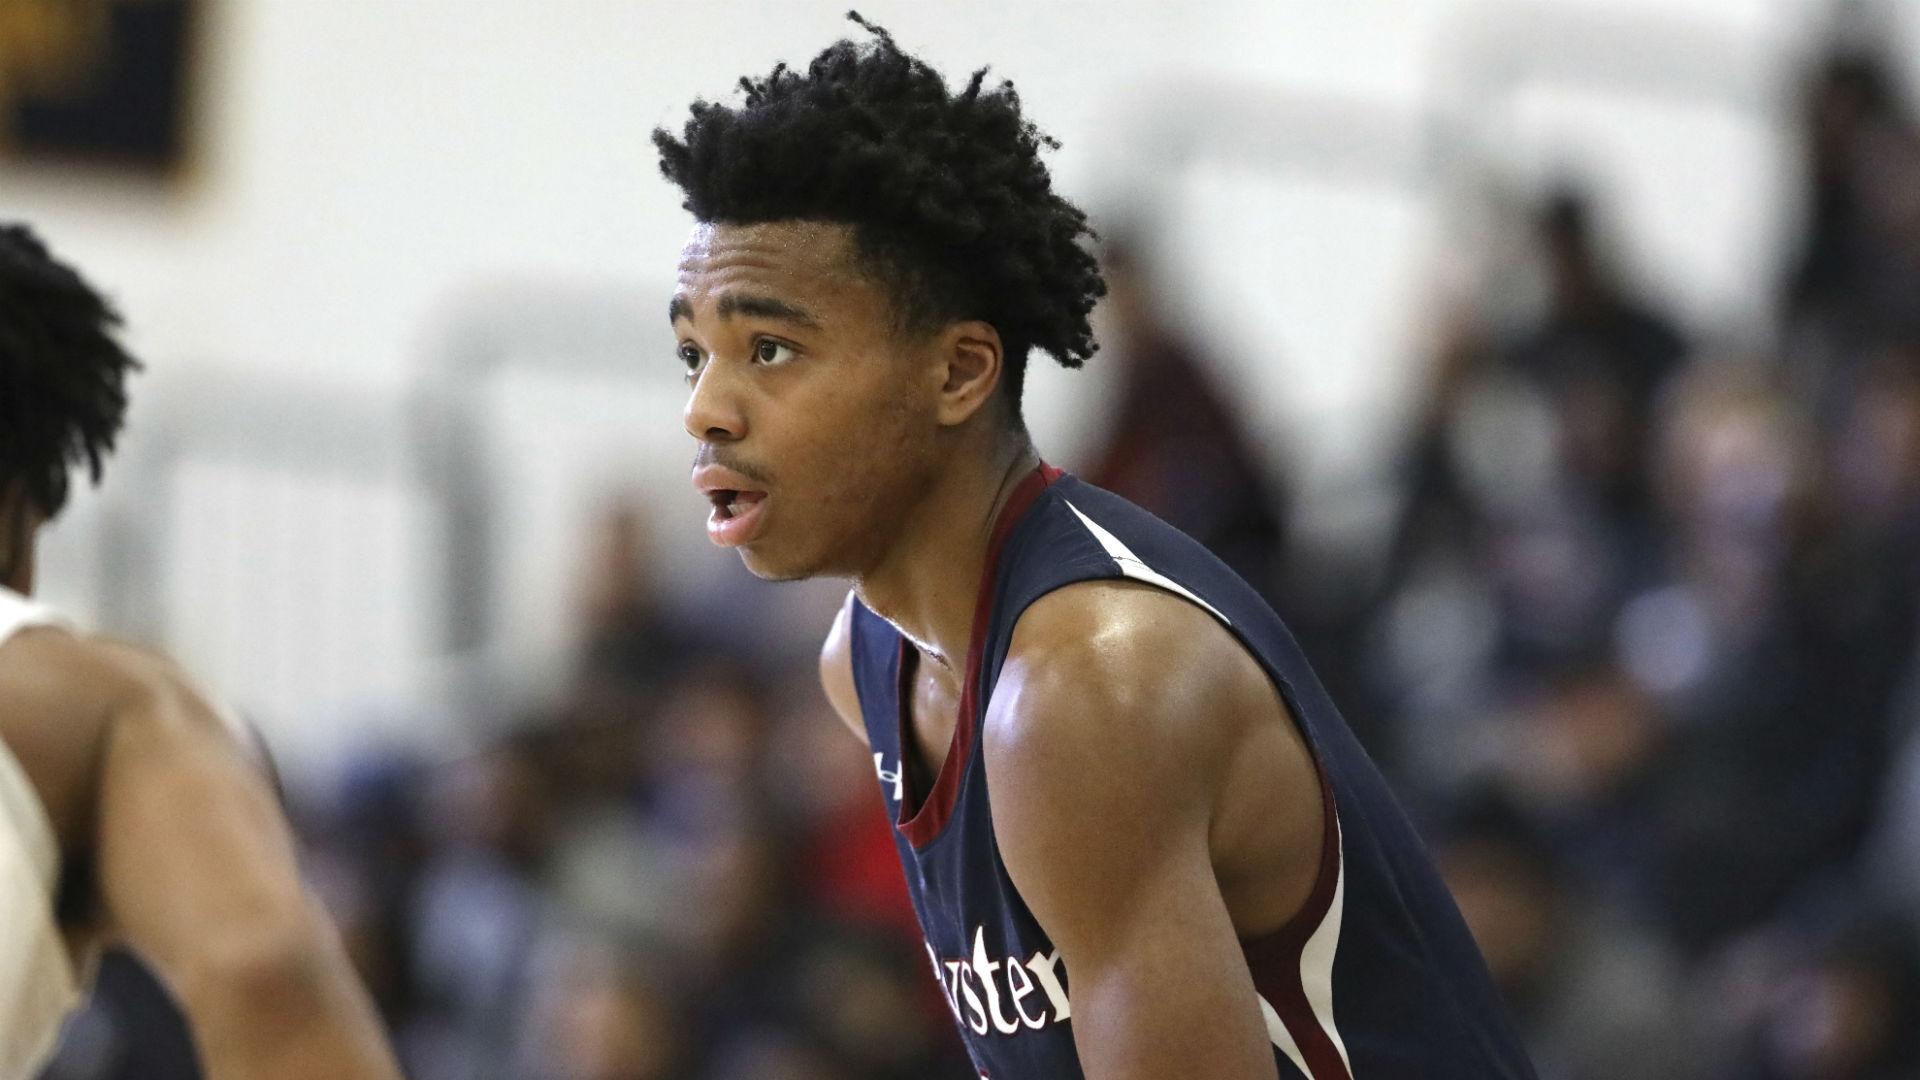 Could Jalen Lecque, A High School To The NBA Prospect, Be A 2nd